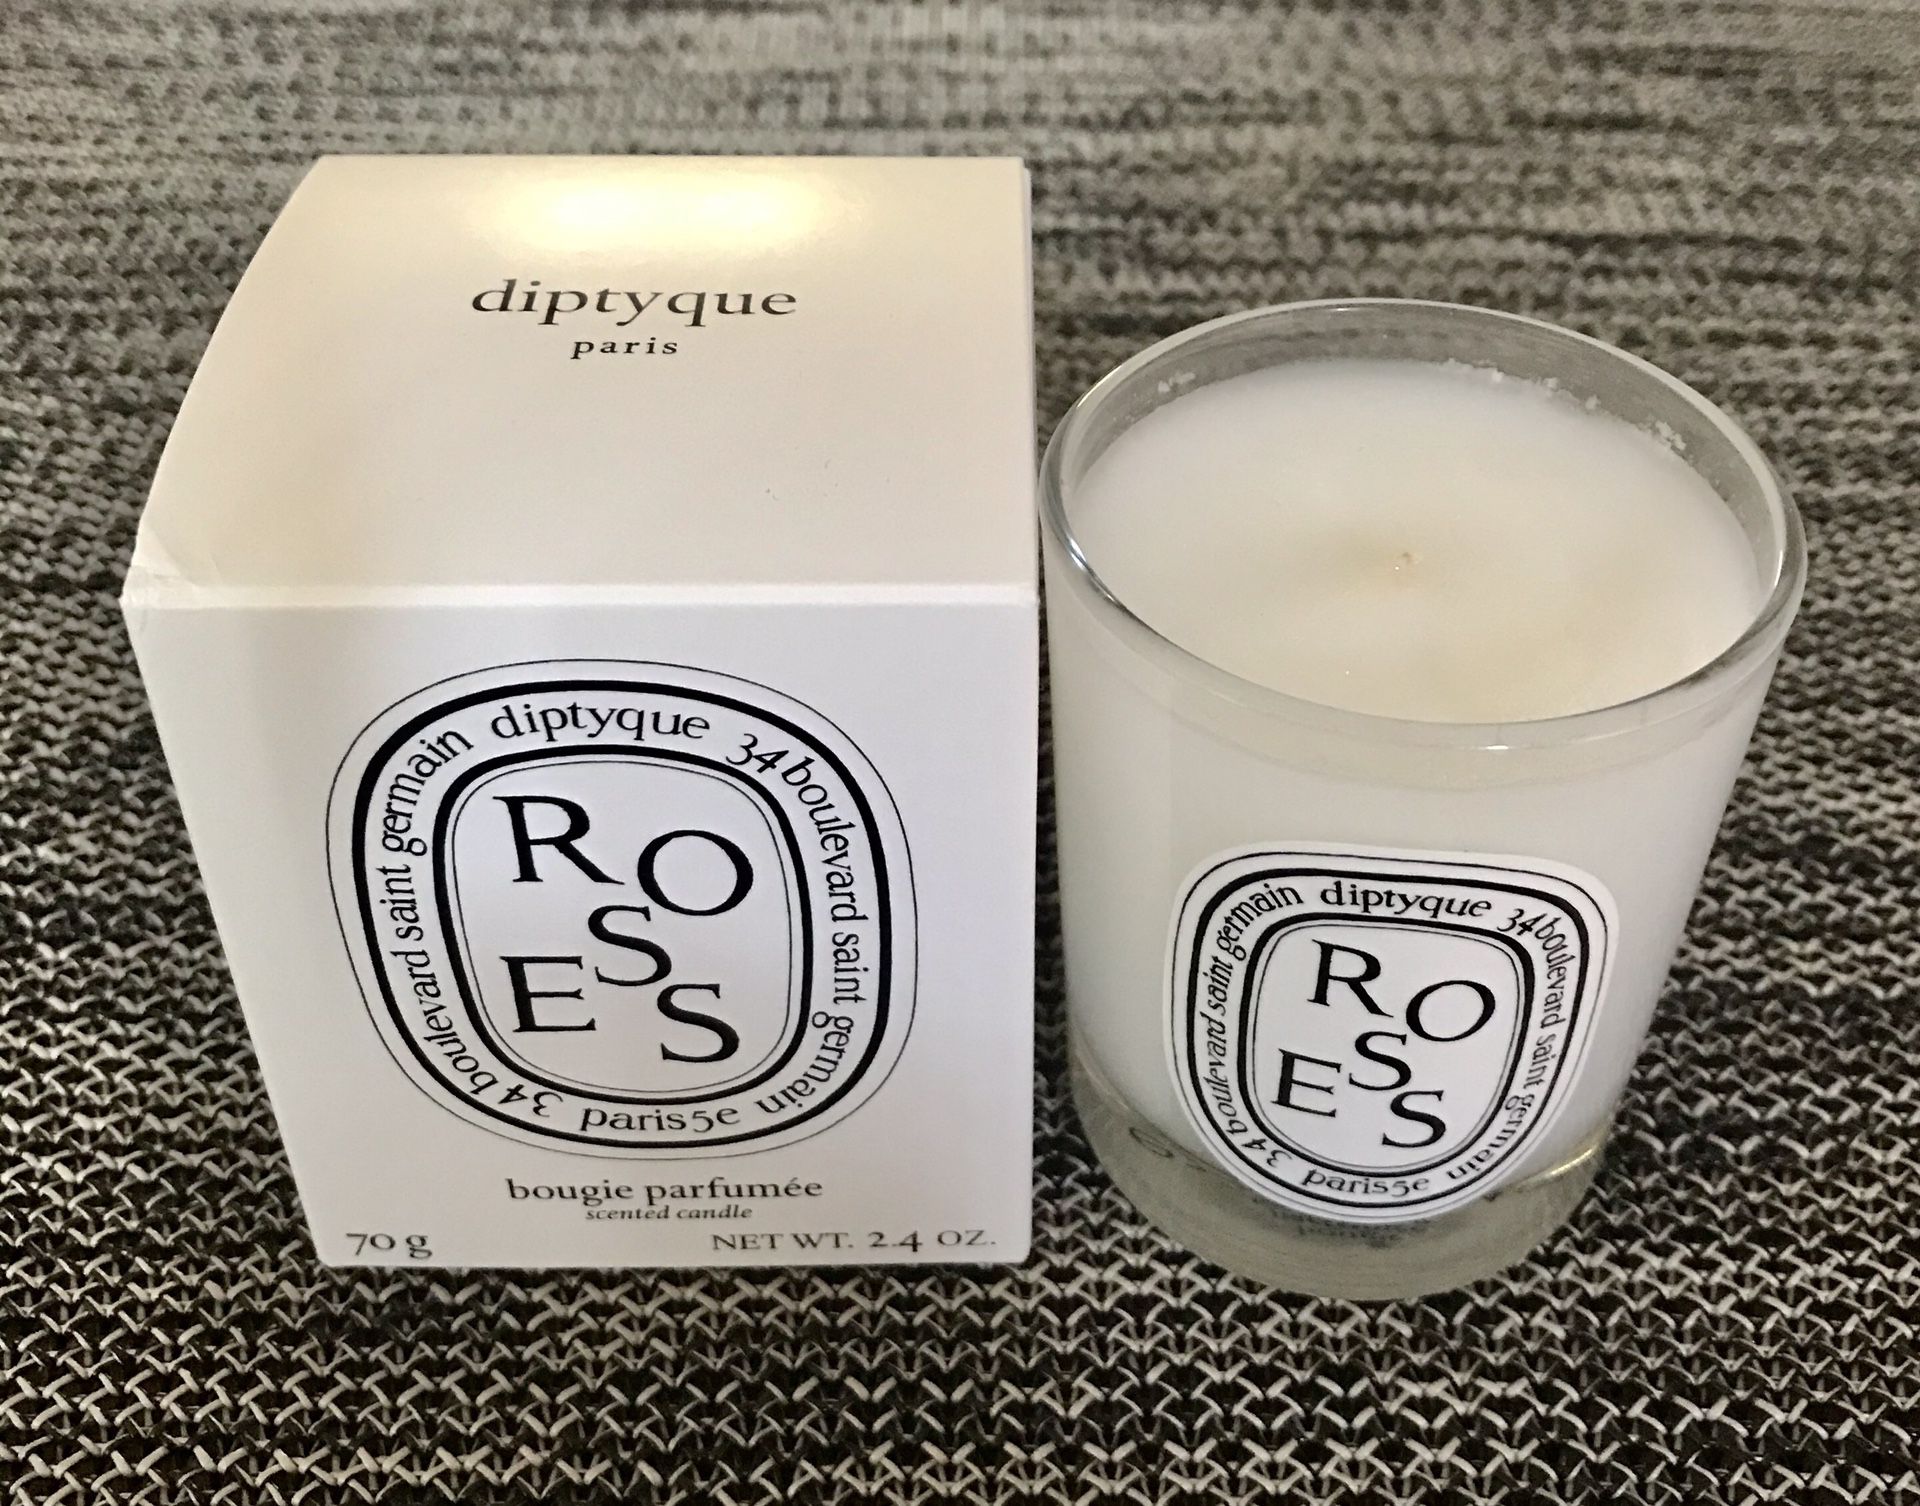 Diptyque ROSES candle